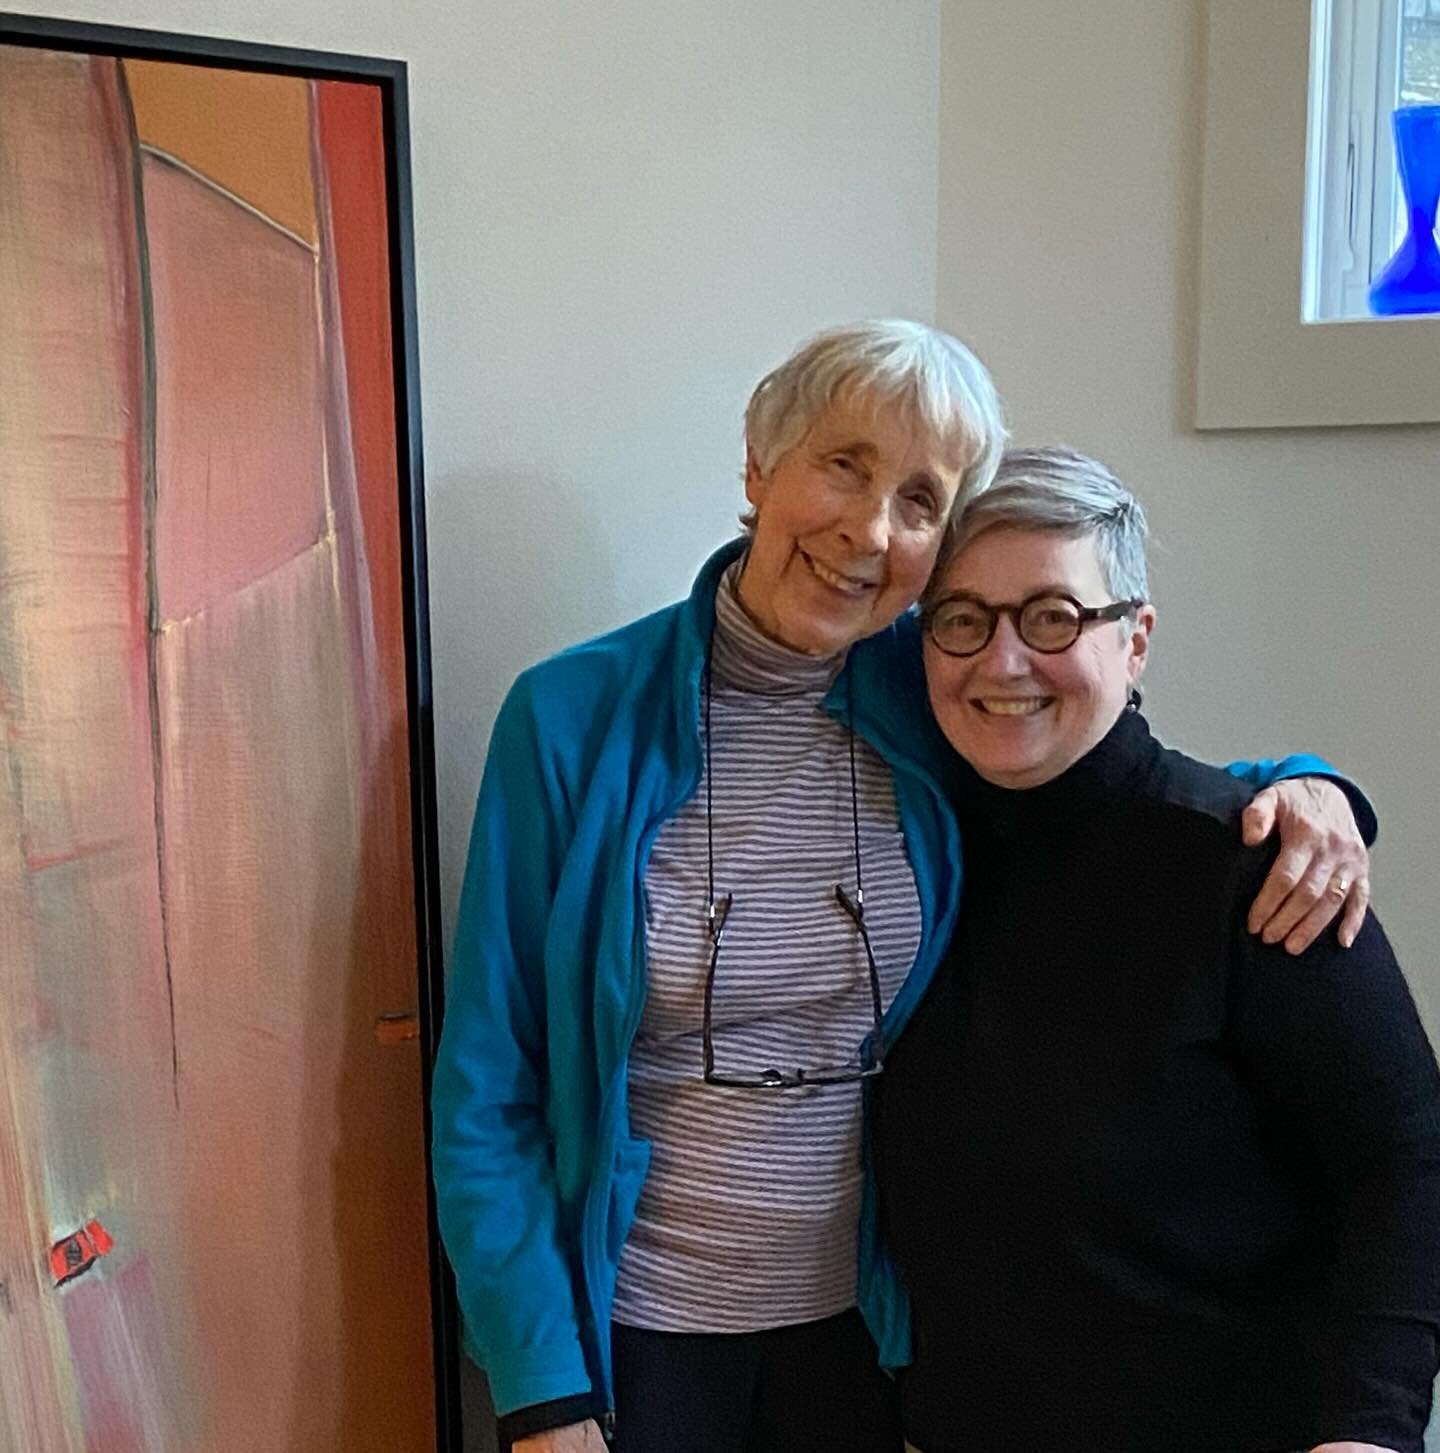 Many thanks to the lovely @sharonthompson.ca for hosting us in Calgary, and for showing me your studio and current work! 

#sharonthompwon #lorisokolukart #albertasocietyofartists #albertaabstractartists #abstractart #contemporarycanadianartists #stu